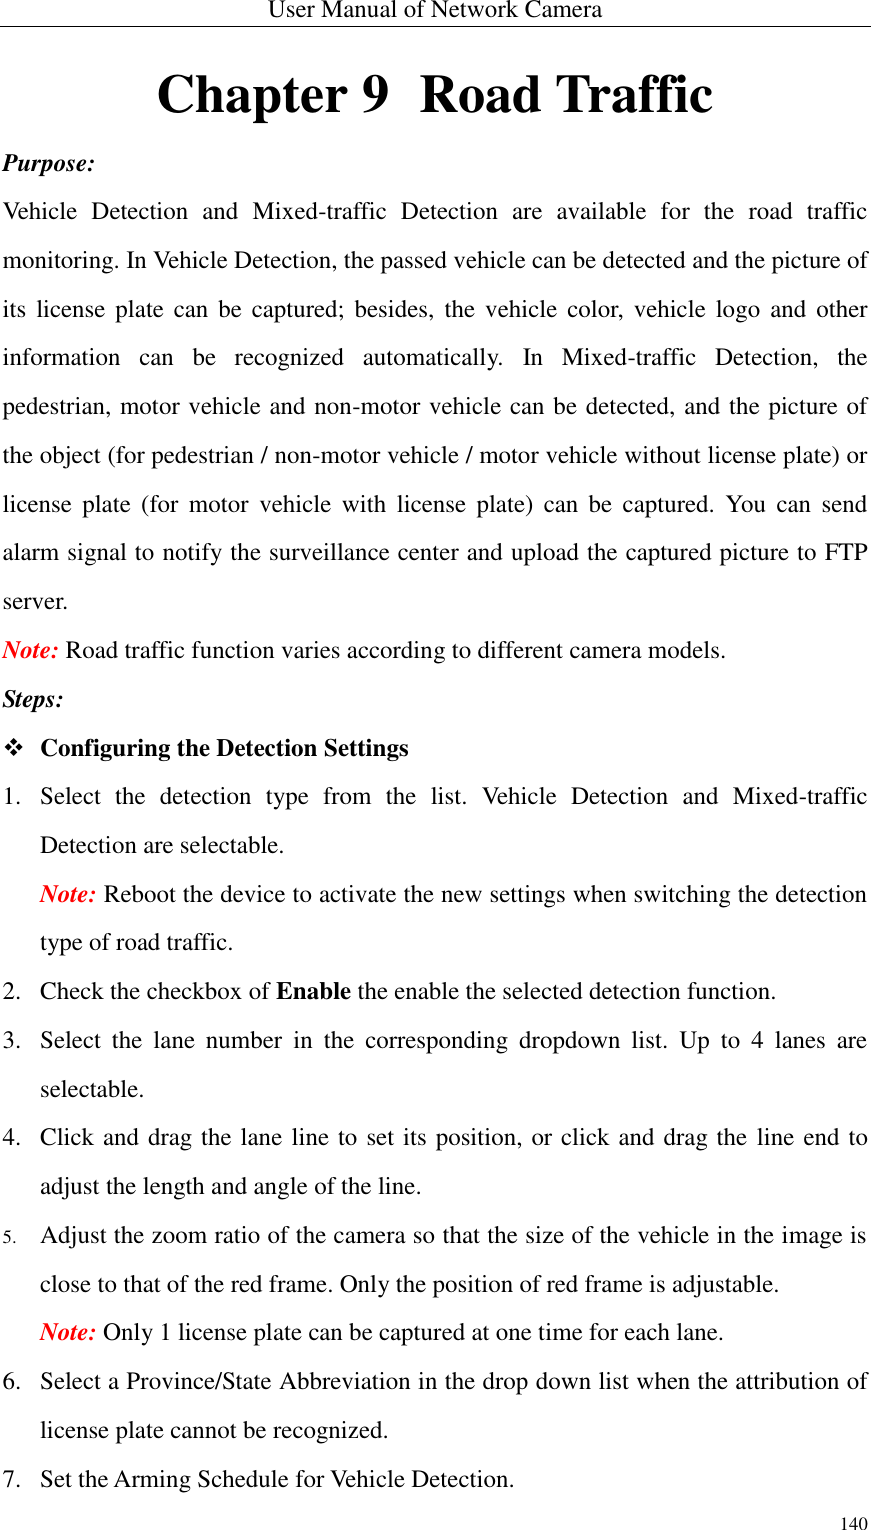 User Manual of Network Camera 140  Chapter 9   Road Traffic Purpose: Vehicle  Detection  and  Mixed-traffic  Detection  are  available  for  the  road  traffic monitoring. In Vehicle Detection, the passed vehicle can be detected and the picture of its  license plate can be  captured;  besides,  the  vehicle  color,  vehicle logo  and  other information  can  be  recognized  automatically.  In  Mixed-traffic  Detection,  the pedestrian, motor vehicle and non-motor vehicle can be detected, and the picture of the object (for pedestrian / non-motor vehicle / motor vehicle without license plate) or license  plate  (for  motor  vehicle  with  license  plate)  can  be  captured.  You  can  send alarm signal to notify the surveillance center and upload the captured picture to FTP server. Note: Road traffic function varies according to different camera models. Steps:  Configuring the Detection Settings 1. Select  the  detection  type  from  the  list.  Vehicle  Detection  and  Mixed-traffic Detection are selectable. Note: Reboot the device to activate the new settings when switching the detection type of road traffic. 2. Check the checkbox of Enable the enable the selected detection function. 3. Select  the  lane  number  in  the  corresponding  dropdown  list.  Up  to  4  lanes  are selectable. 4. Click and drag the lane line to set its position, or click and drag the line end to adjust the length and angle of the line. 5. Adjust the zoom ratio of the camera so that the size of the vehicle in the image is close to that of the red frame. Only the position of red frame is adjustable. Note: Only 1 license plate can be captured at one time for each lane. 6. Select a Province/State Abbreviation in the drop down list when the attribution of license plate cannot be recognized. 7. Set the Arming Schedule for Vehicle Detection. 